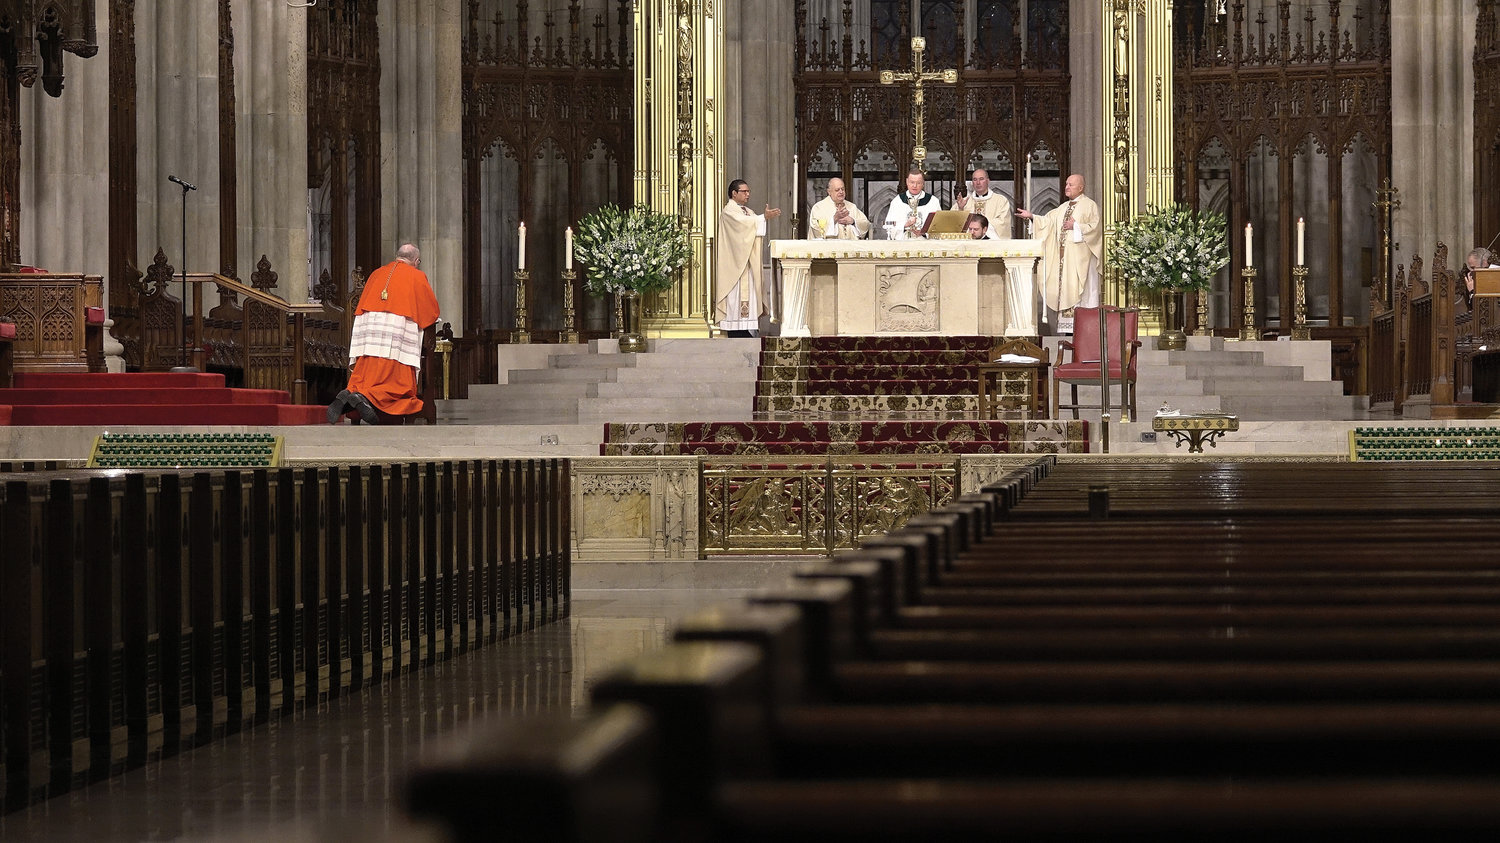 Except for clergy on the altar, St. Patrick’s Cathedral was empty during the 2020 St. Patrick’s Day Mass, which was offered as the Covid-19 pandemic was unfolding in New York. Cardinal Dolan will serve as celebrant for this year’s St. Patrick’s Day Mass at the cathedral Wednesday, March 17.